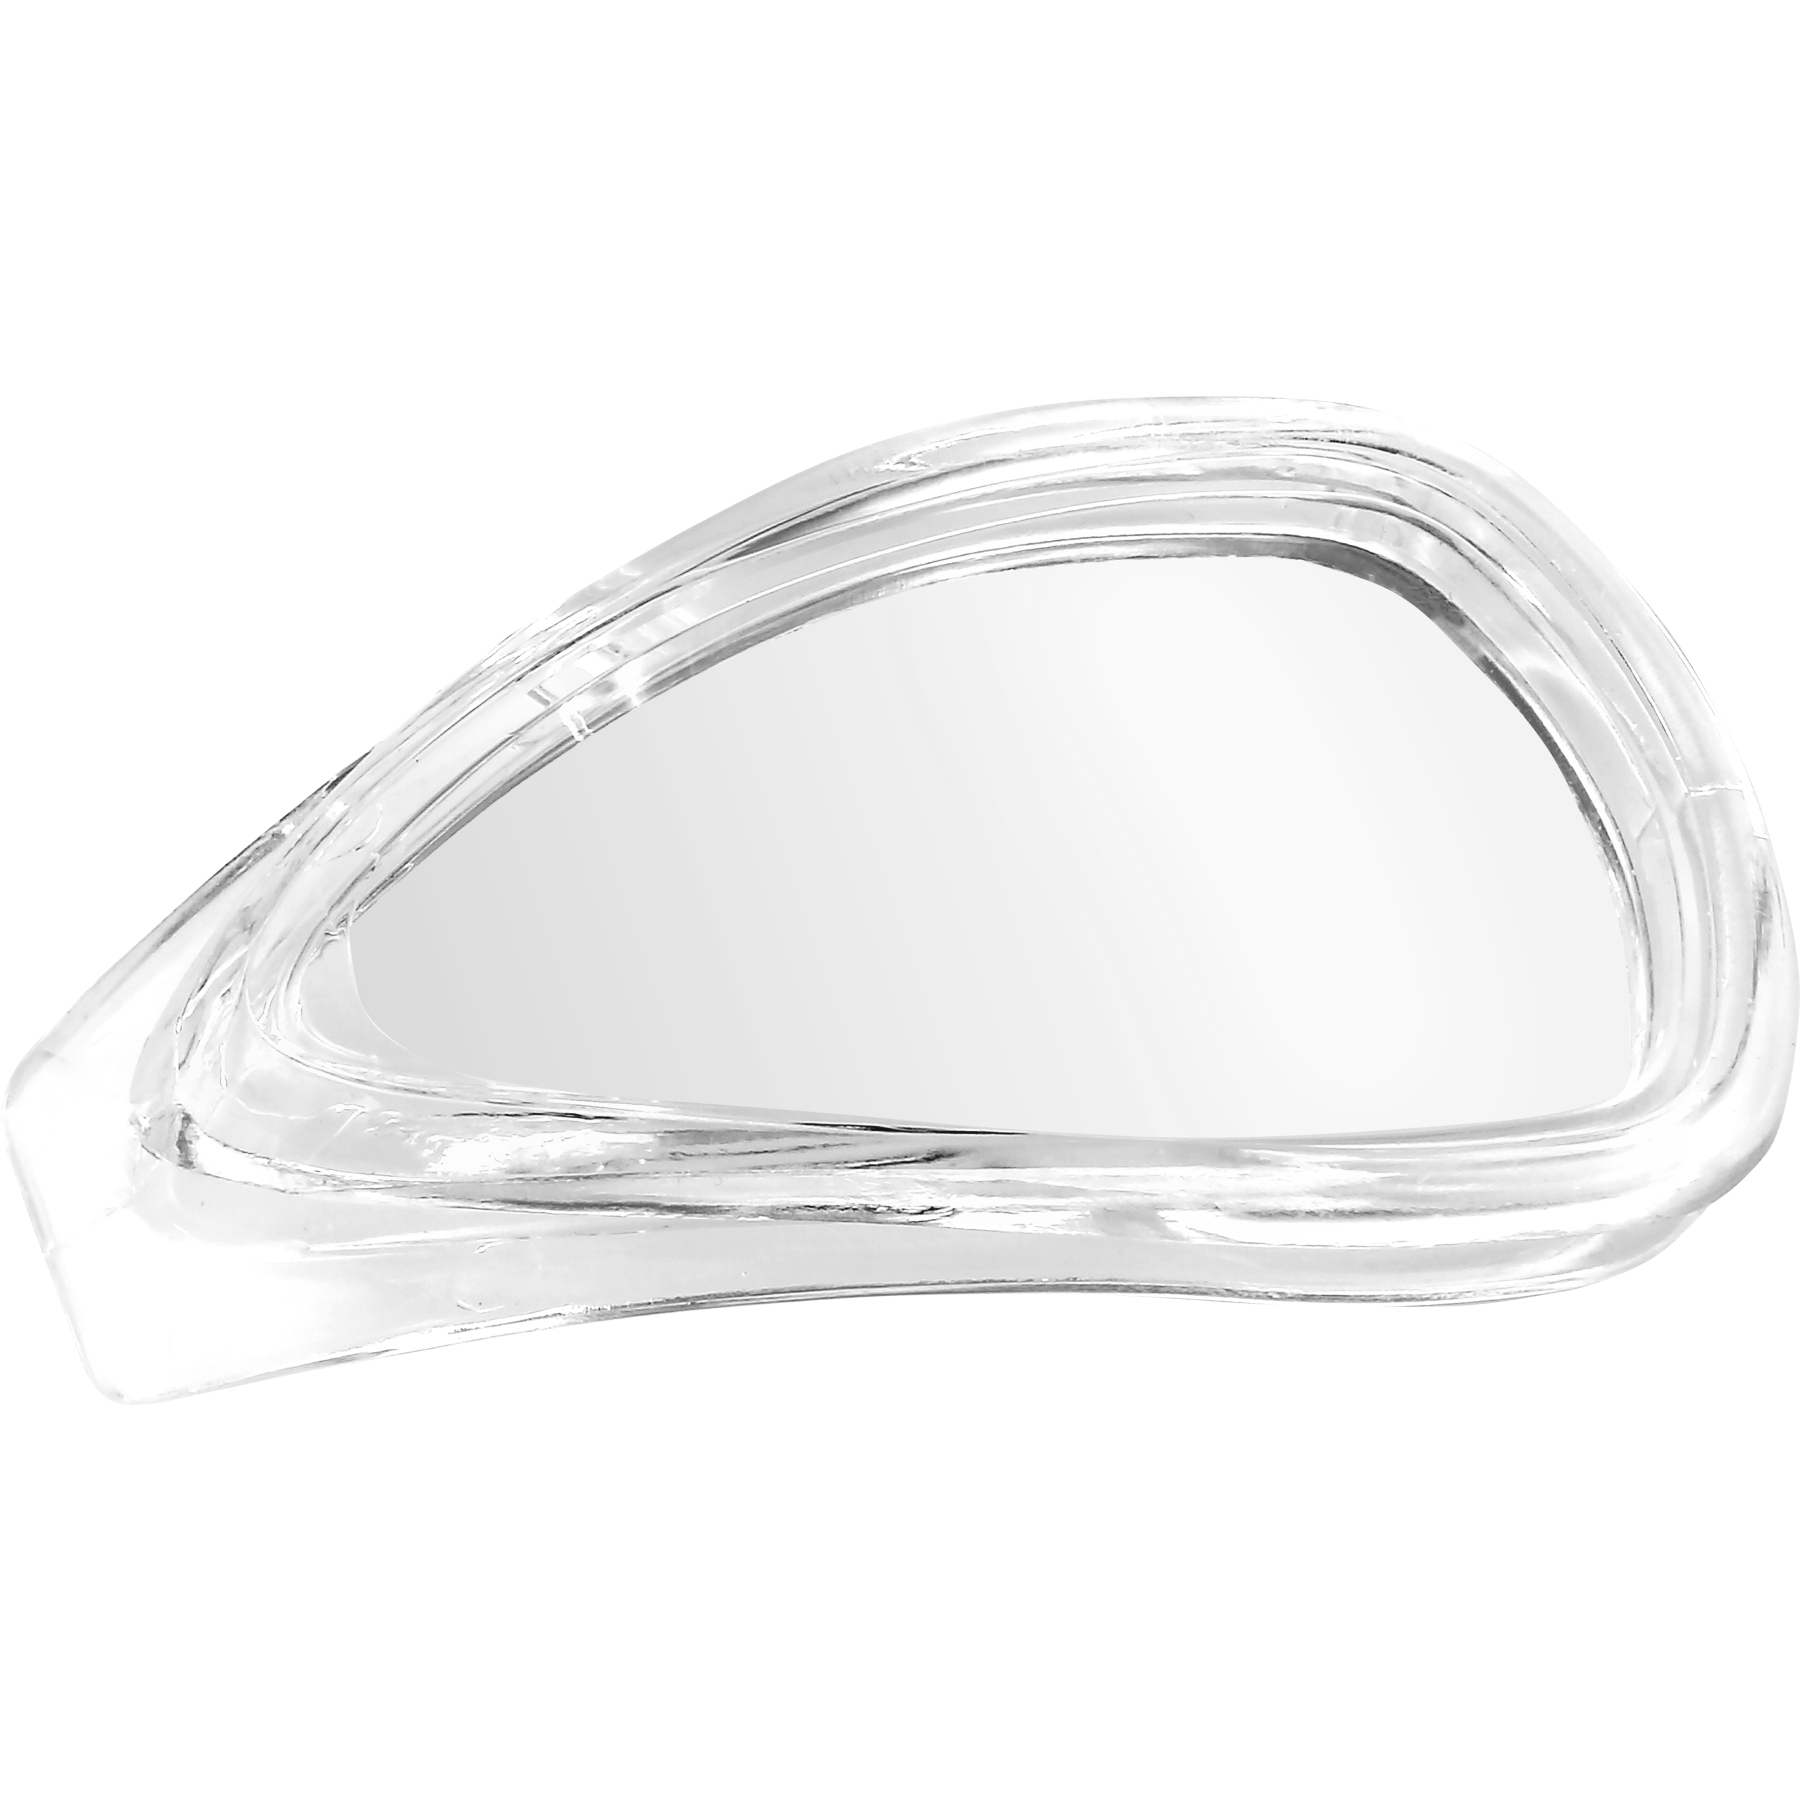 Image of AQUASPHERE Eagle.A Optical Lens - Clear - Transparent -2.5 Diopters